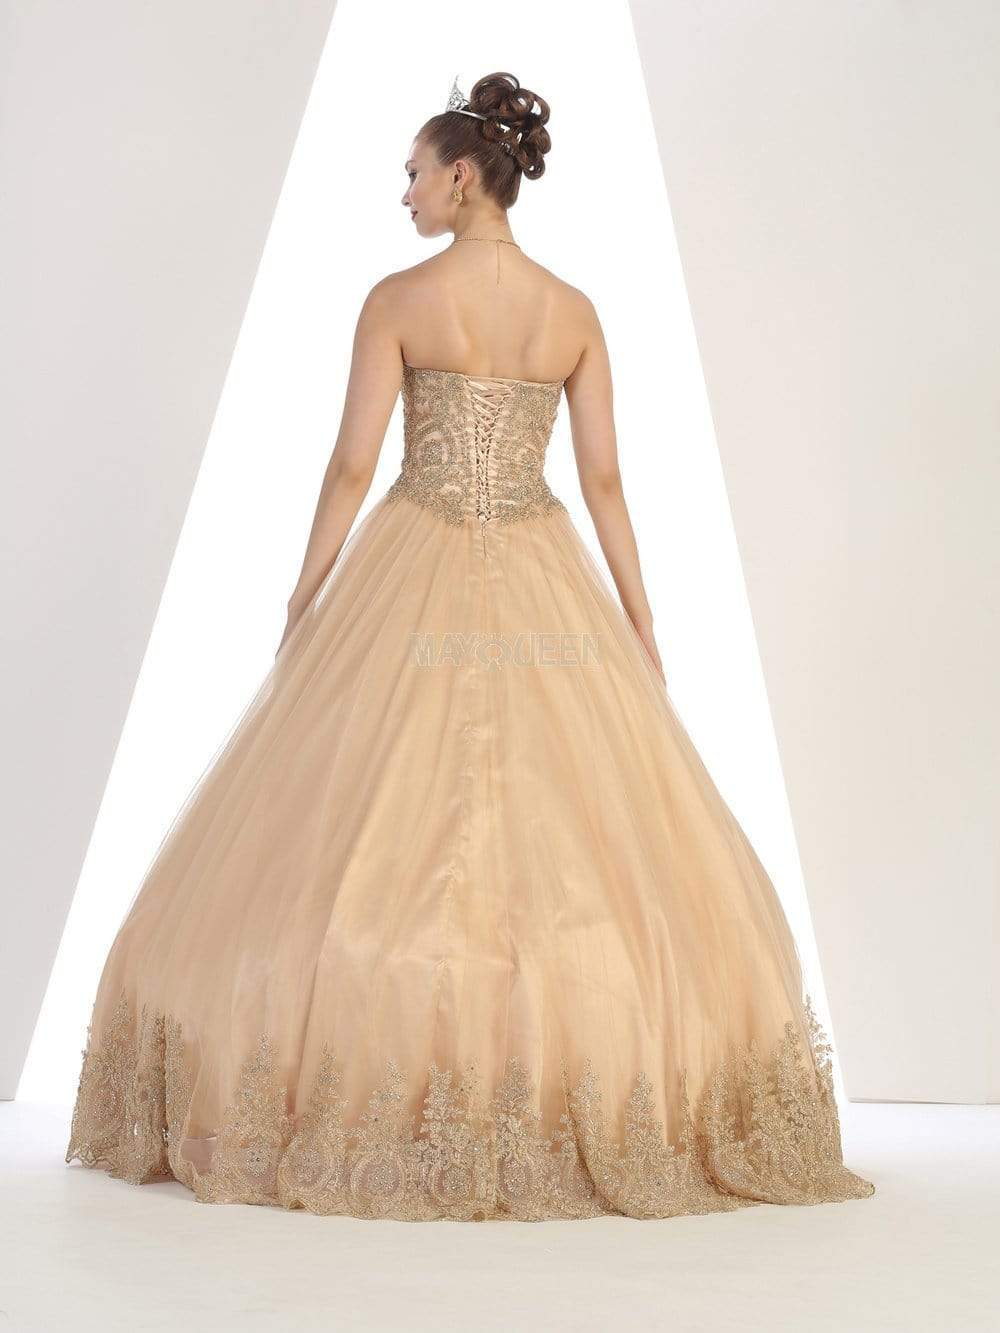 May Queen - LK73 Strapless Sweetheart Gold Lace Embellished Ballgown Ball Gowns